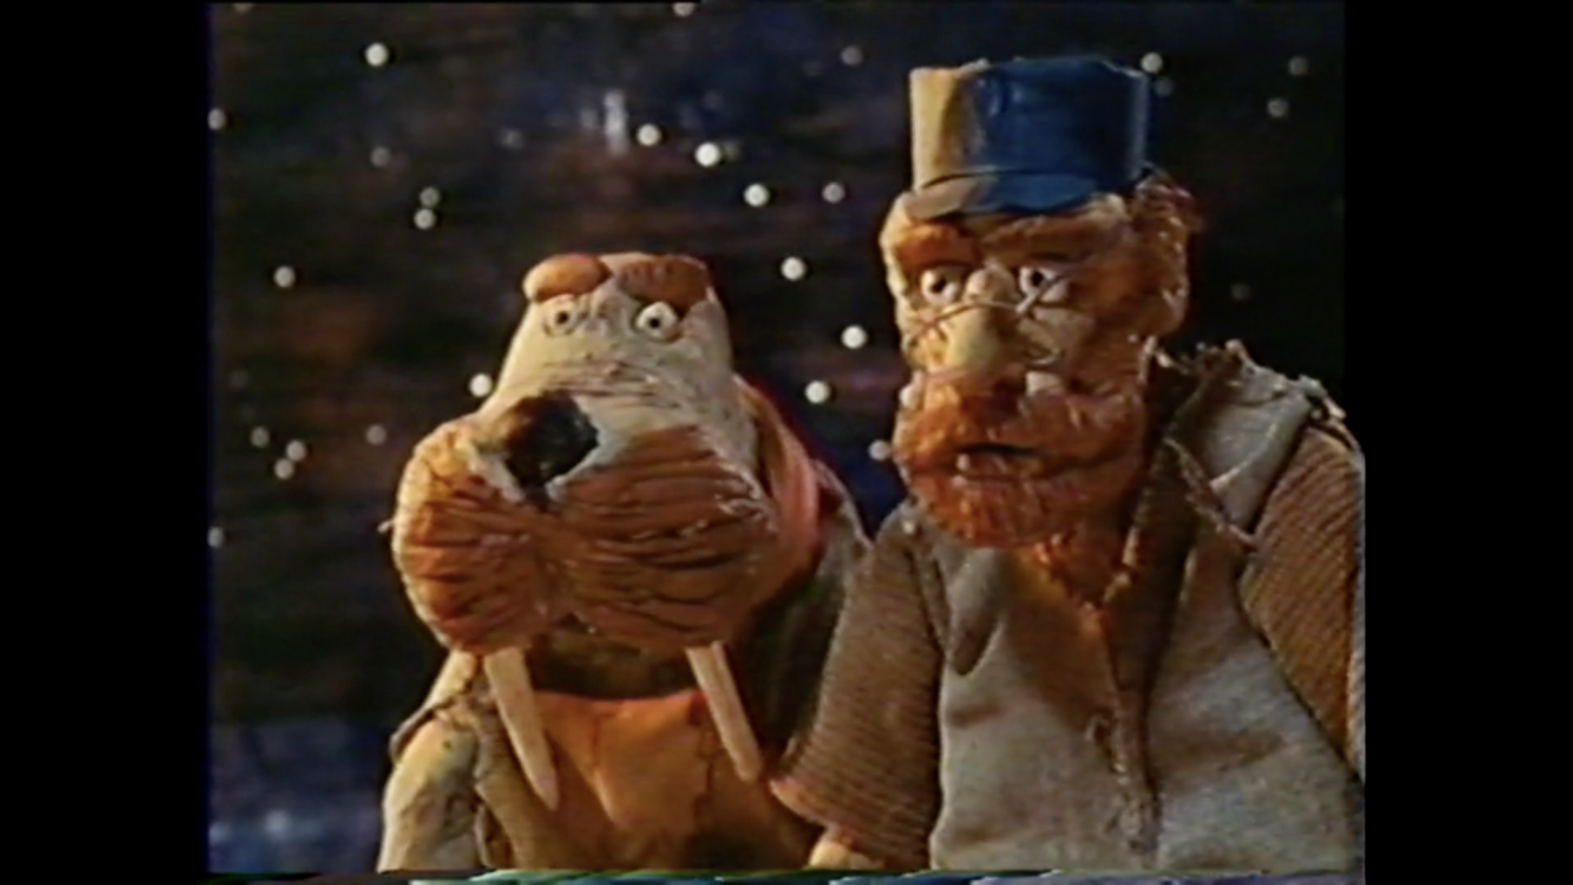 A stop motion animated walrus and carpenter.